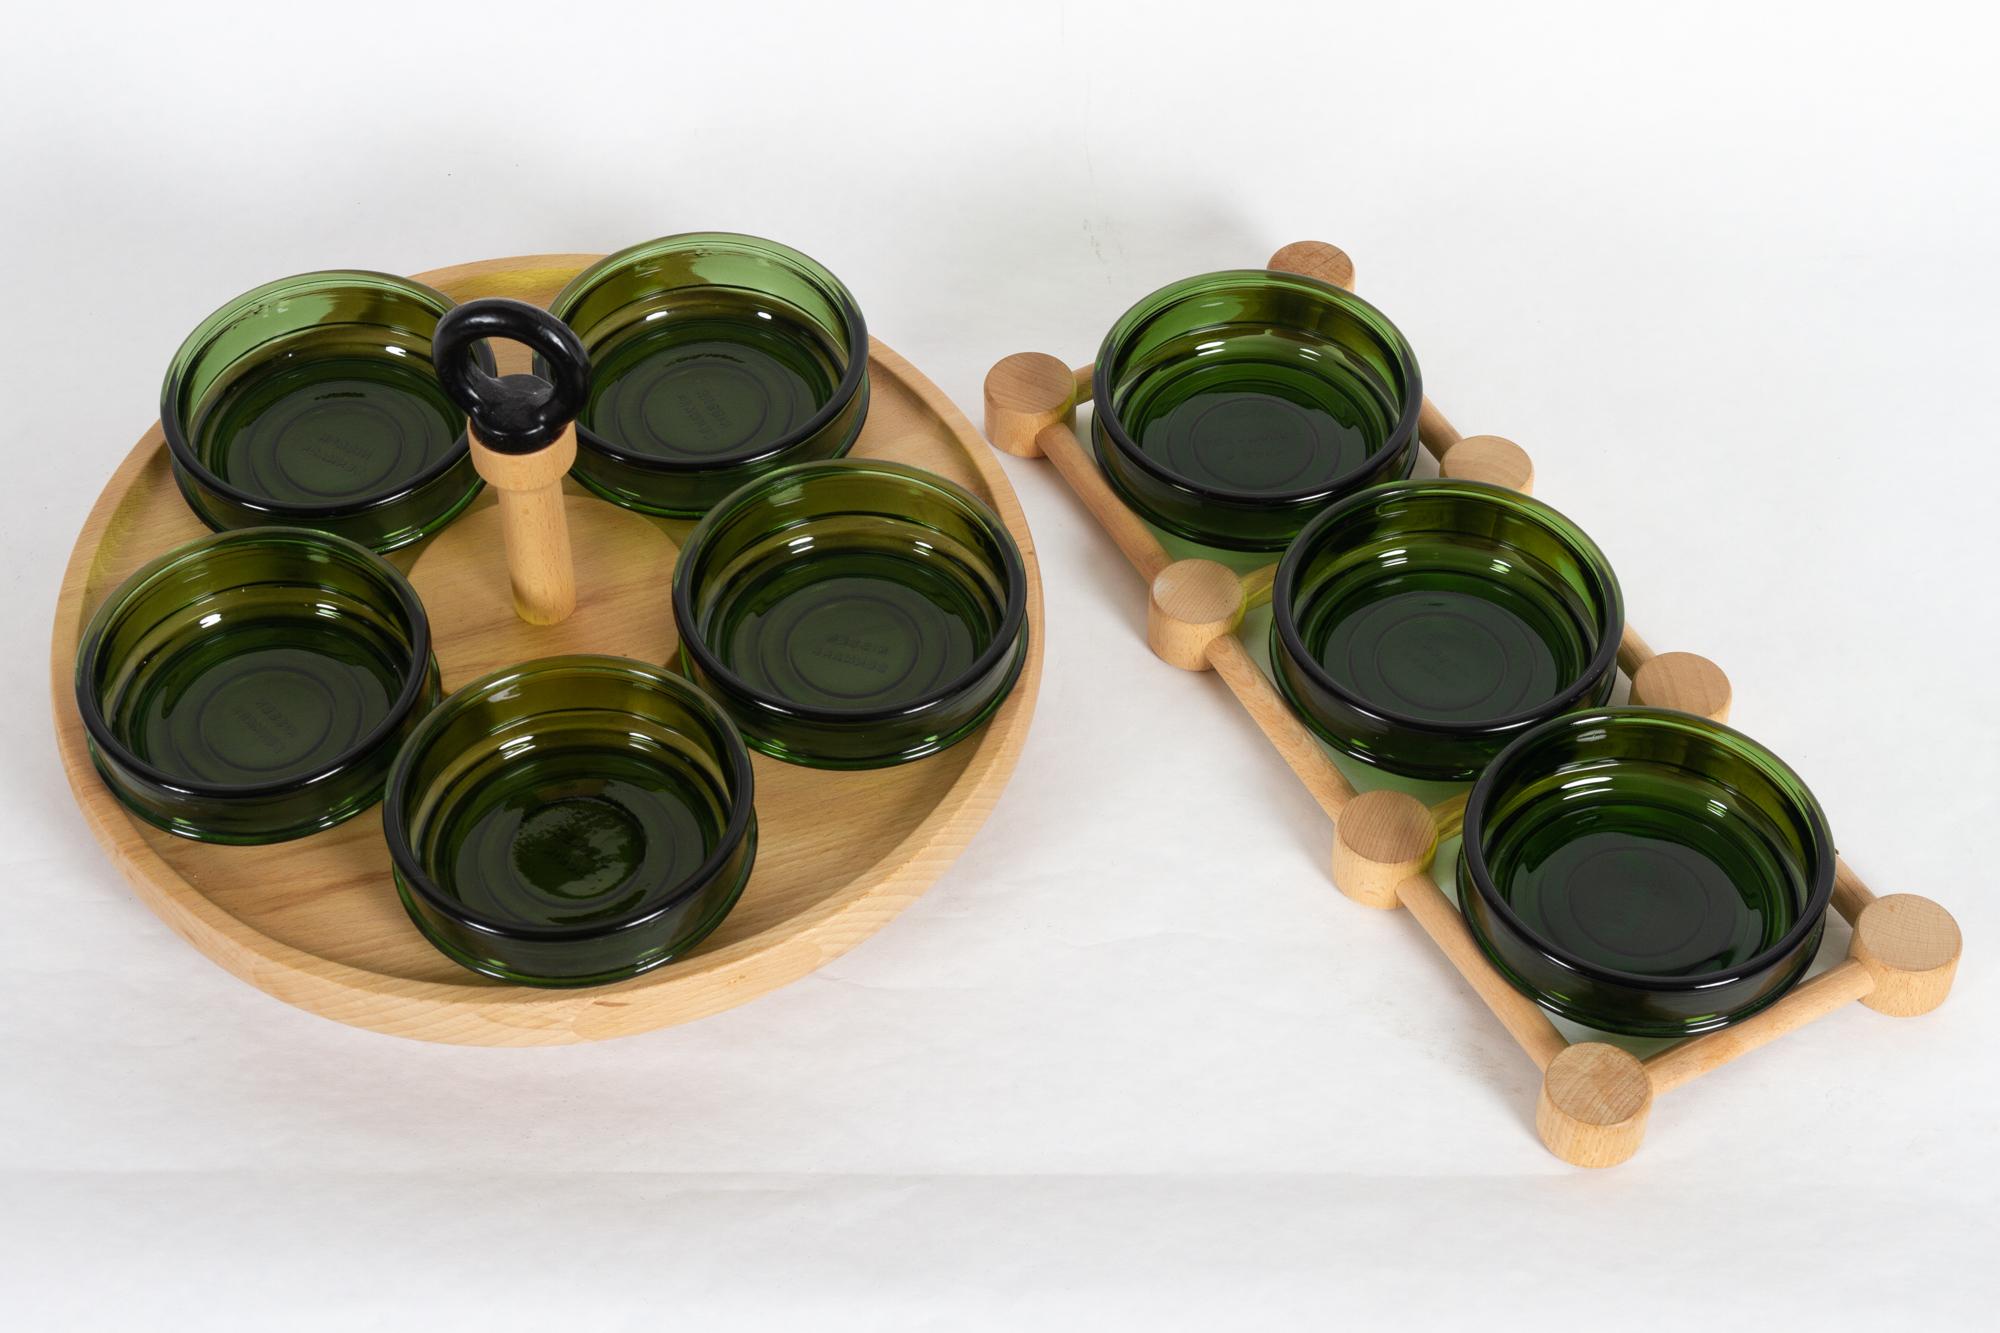 Danish vintage cabaret serving trays 1970s
Two serving trays with green glass bowls from Danish manufacturer Nissen. One tray is rotatable with five bowls. Both are made in solid beech, the large tray has top in cast iron.
The bowl measures 11.5